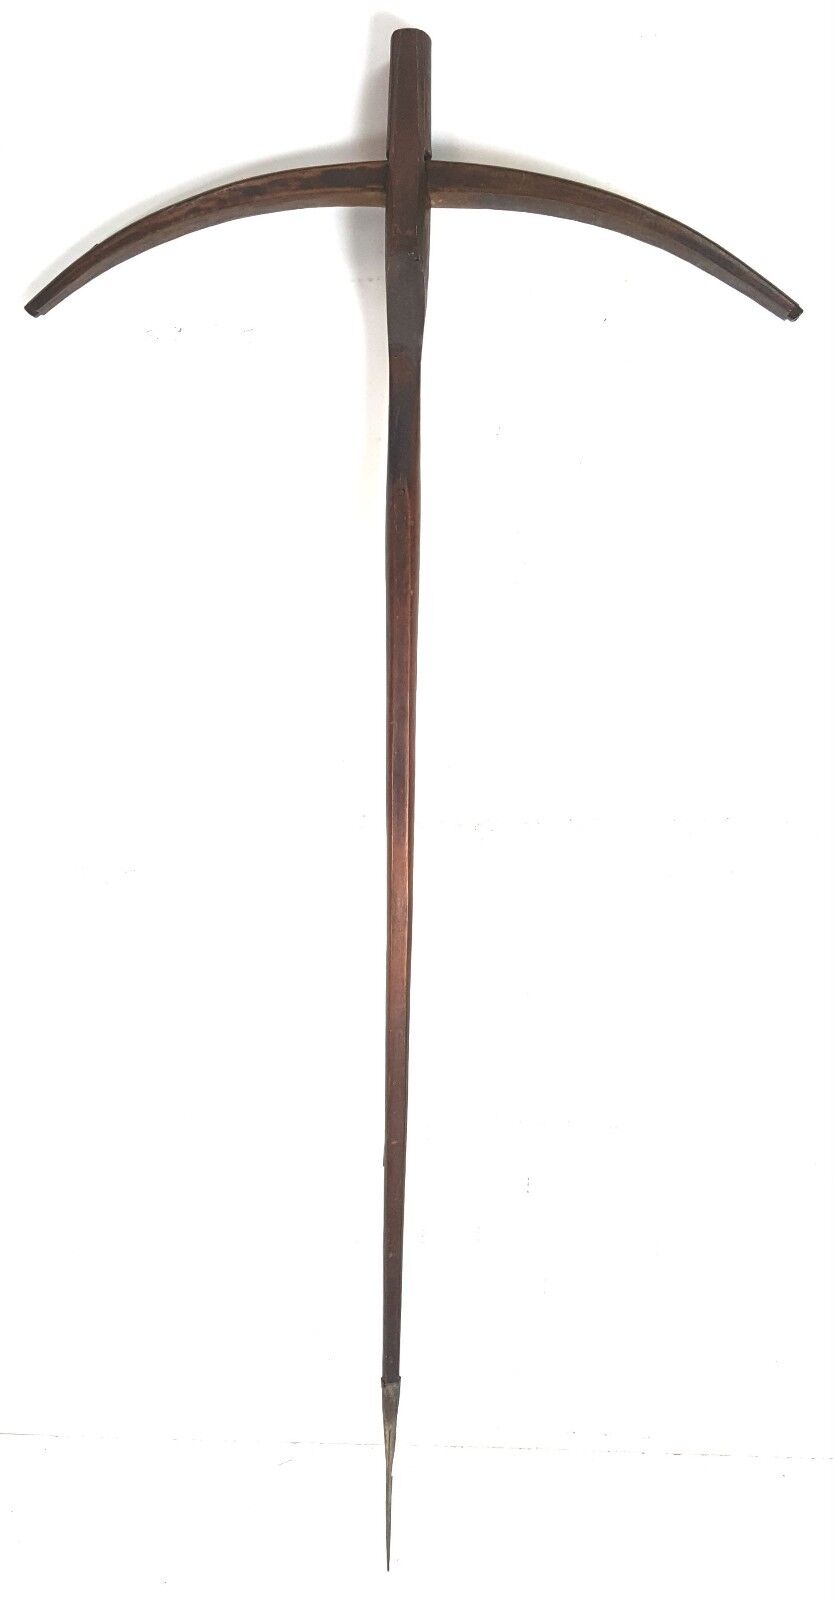 CROSS-LANCE. AFRICAN WOOD. ZONE OF ANGOLA AND NAMBIA. BEGINNING 20TH CENTURY.